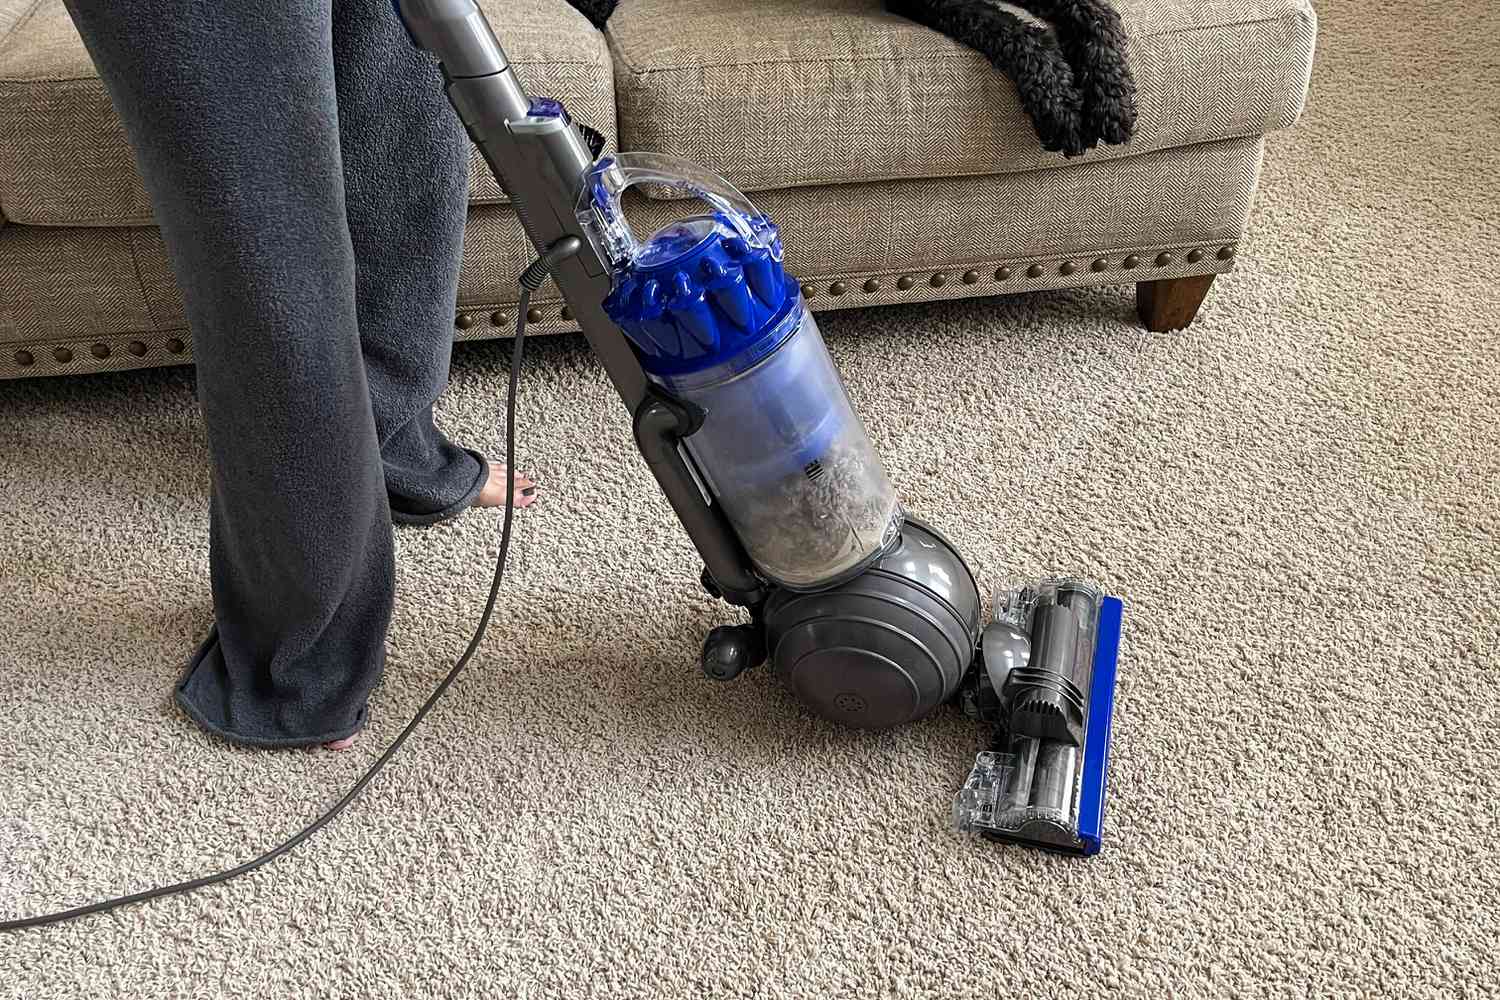 A person uses the Dyson Ball Animal Total Clean to clean a carpet